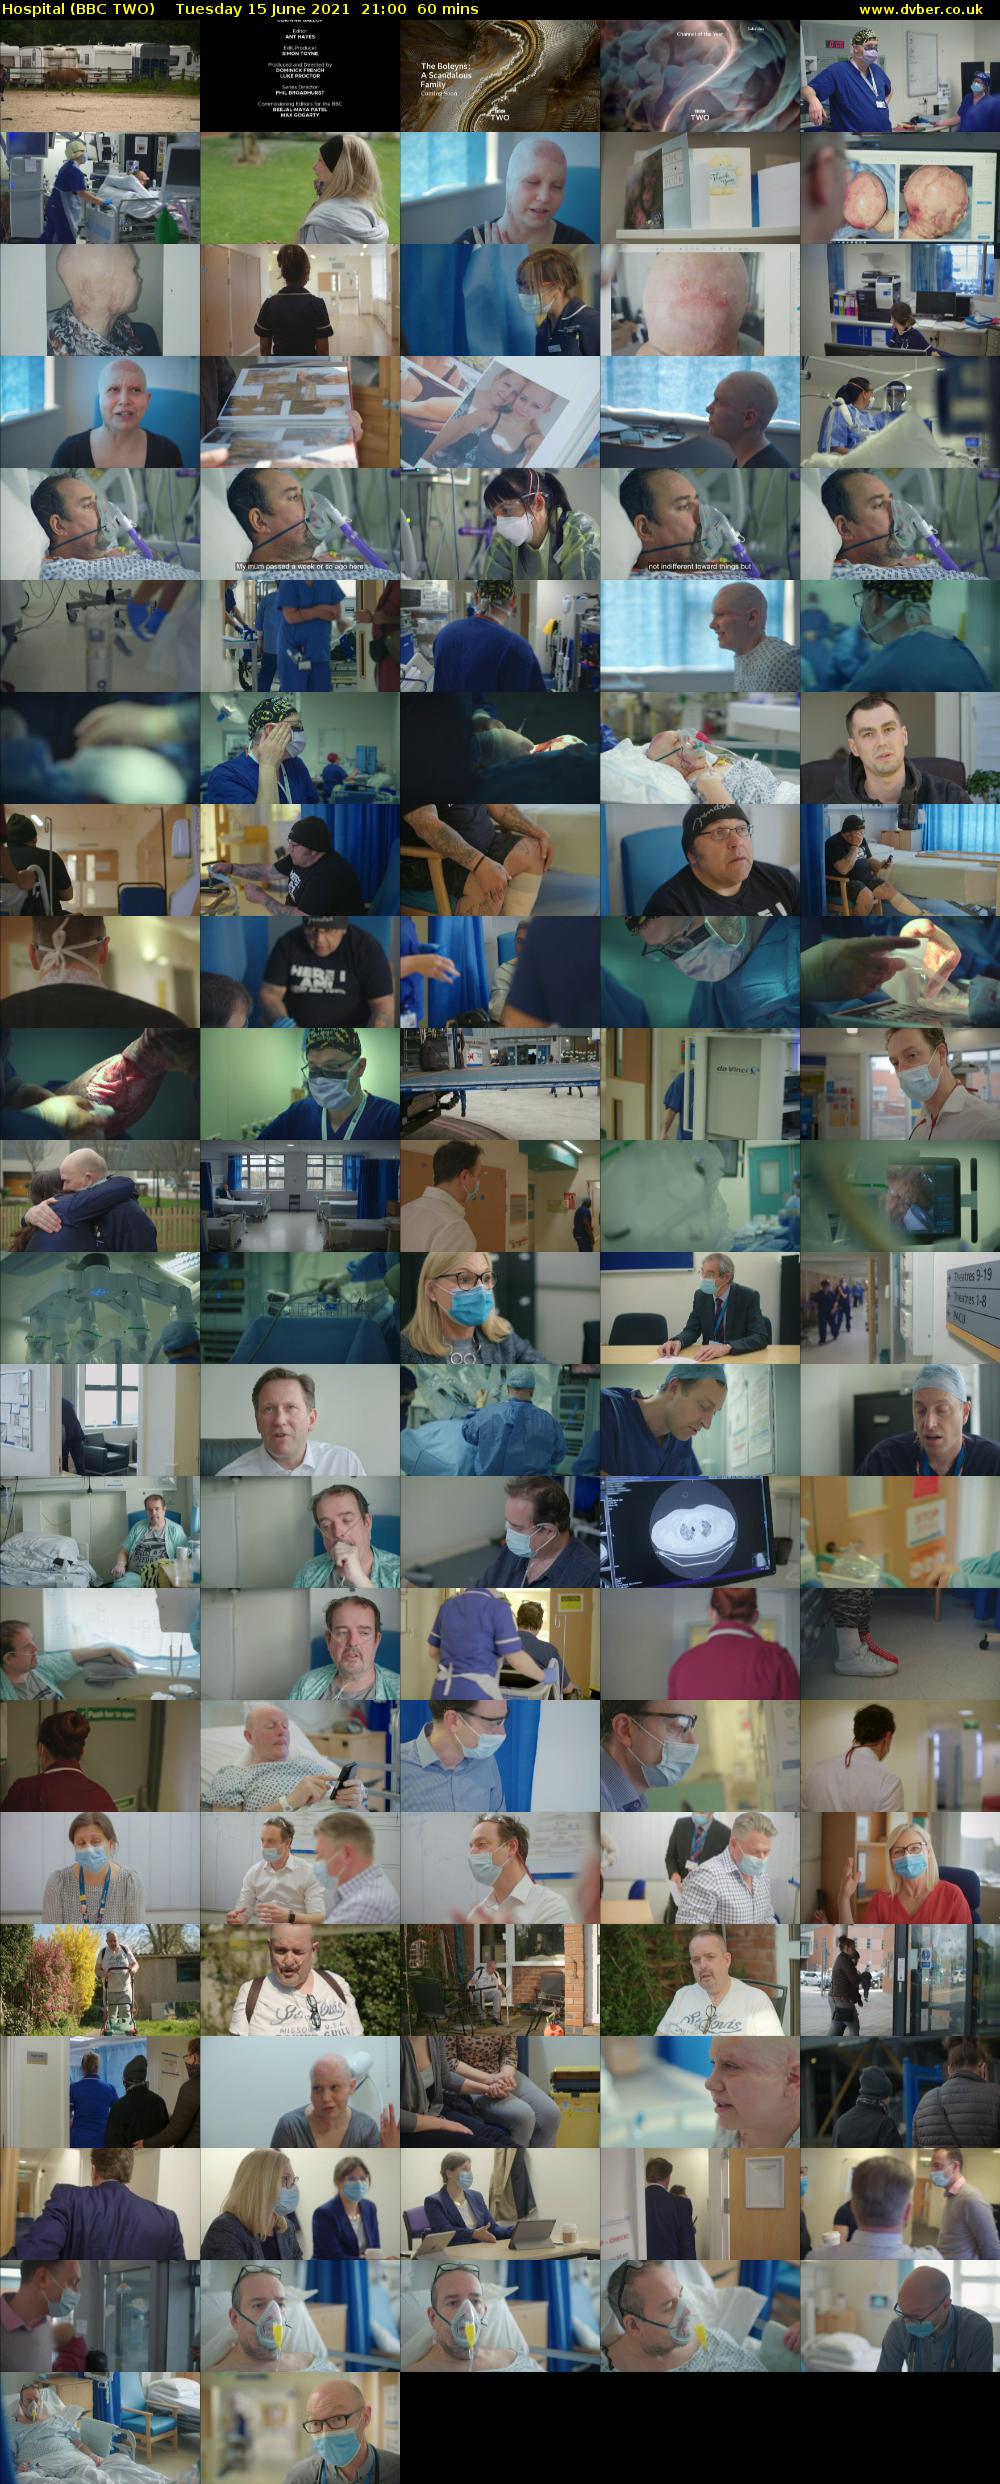 Hospital (BBC TWO) Tuesday 15 June 2021 21:00 - 22:00